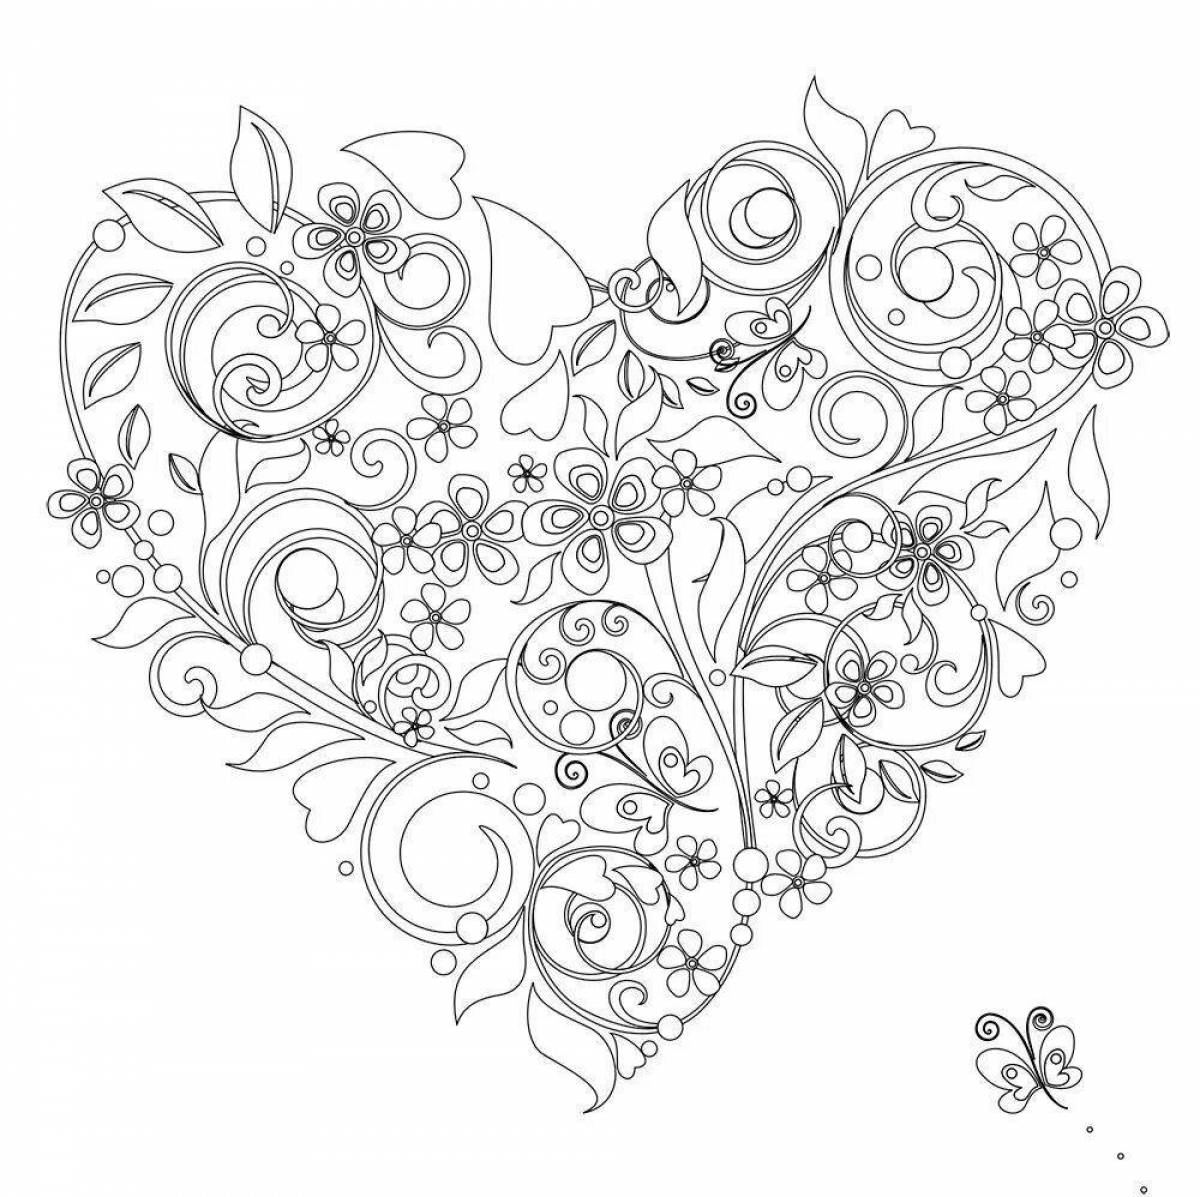 Relaxing heart anti-stress coloring book